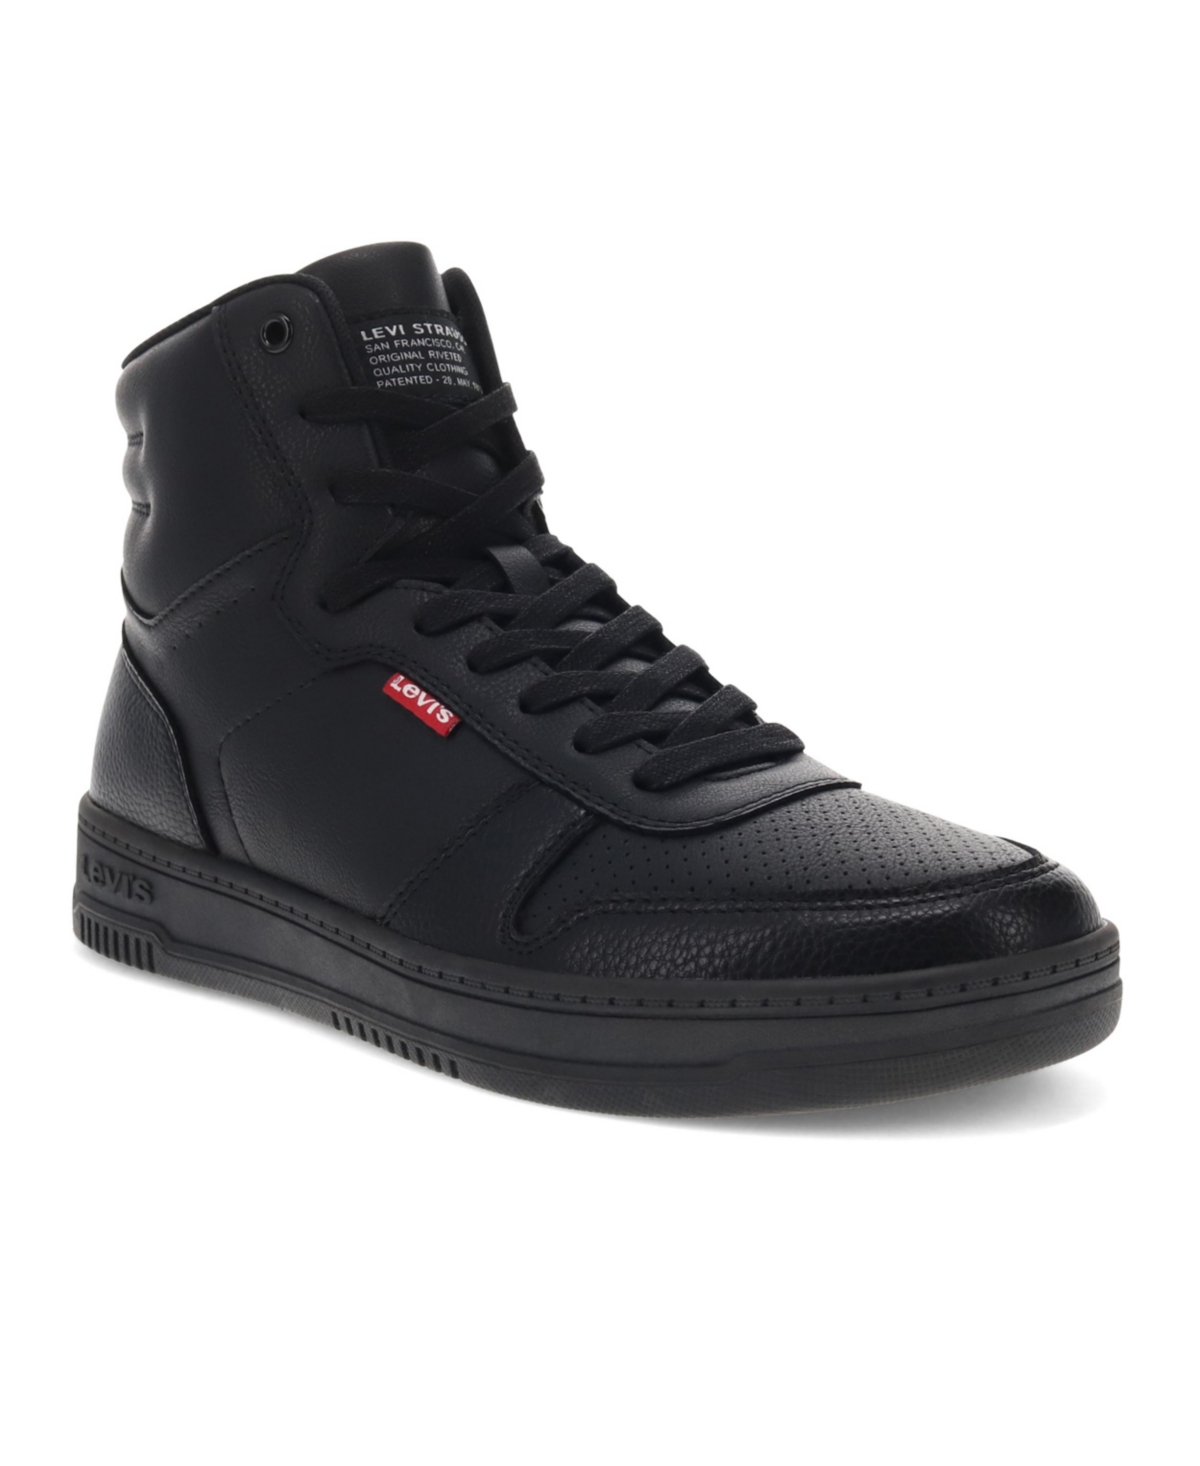 Levi's Men's Drive High Top Faux-leather Lace-up Sneakers Men's Shoes In Black Mono